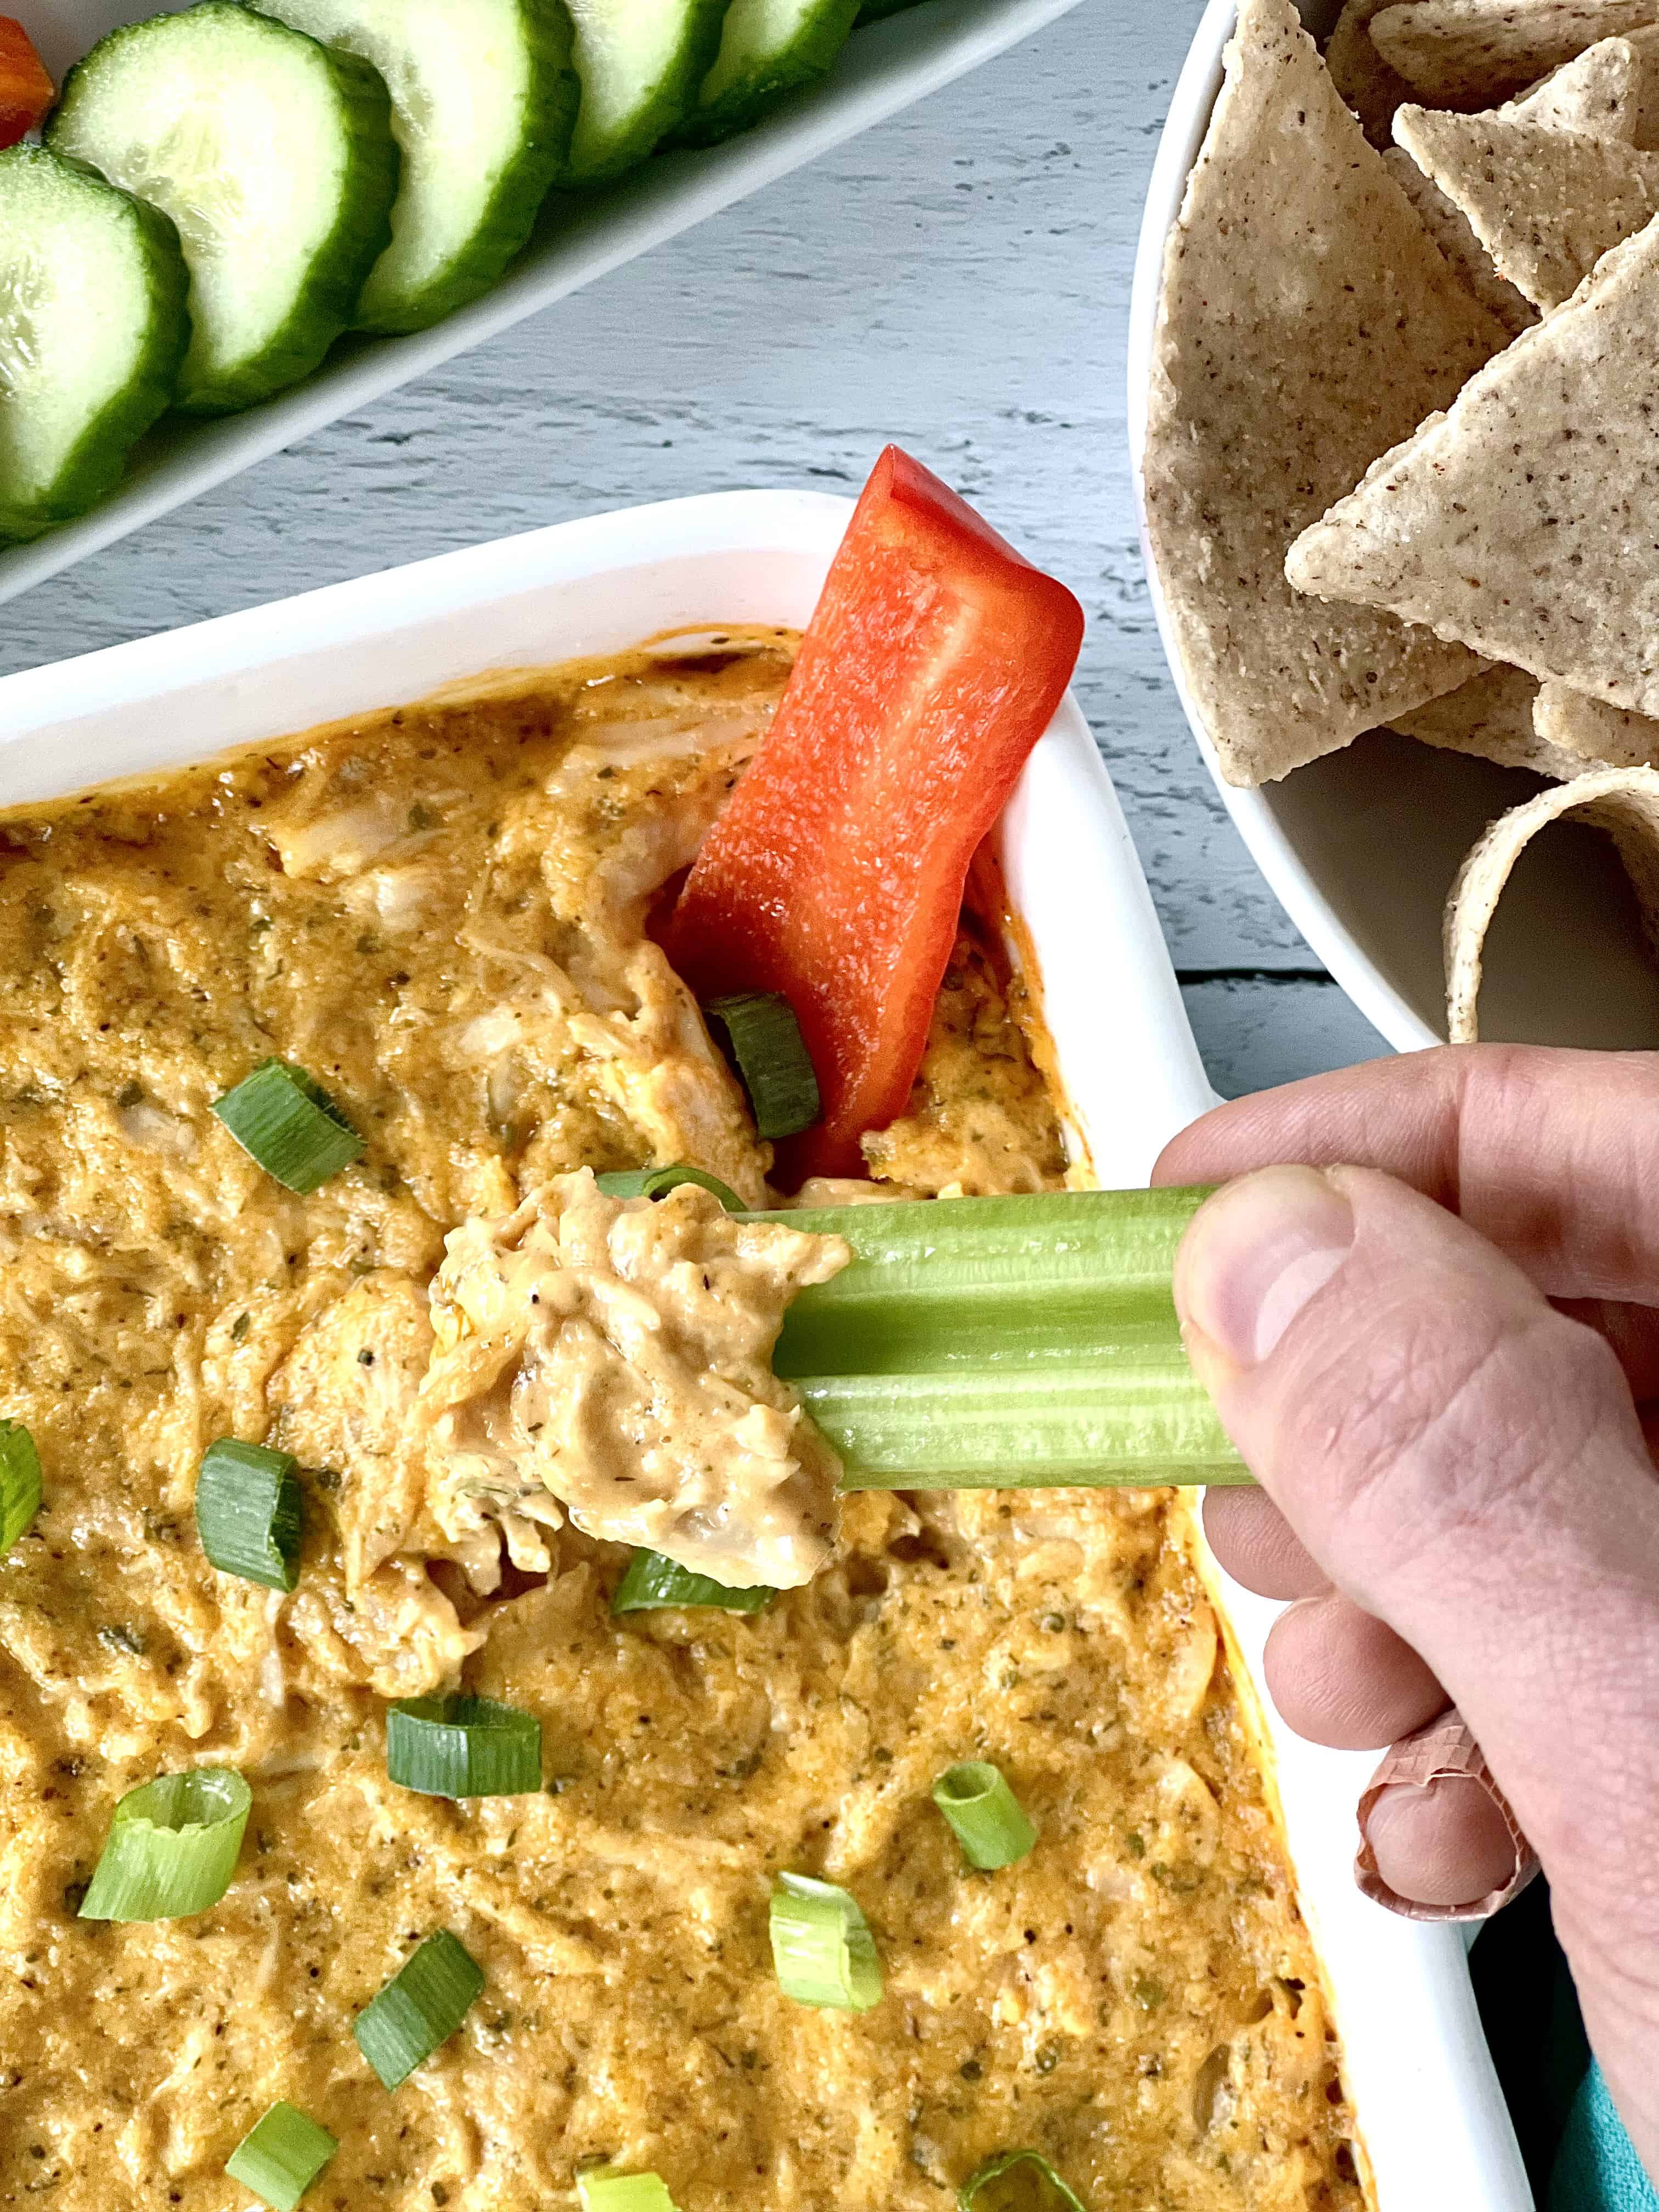 Healthier buffalo dip in a white square baking dish with a hand holding a celery stalk as it scoops up the dip